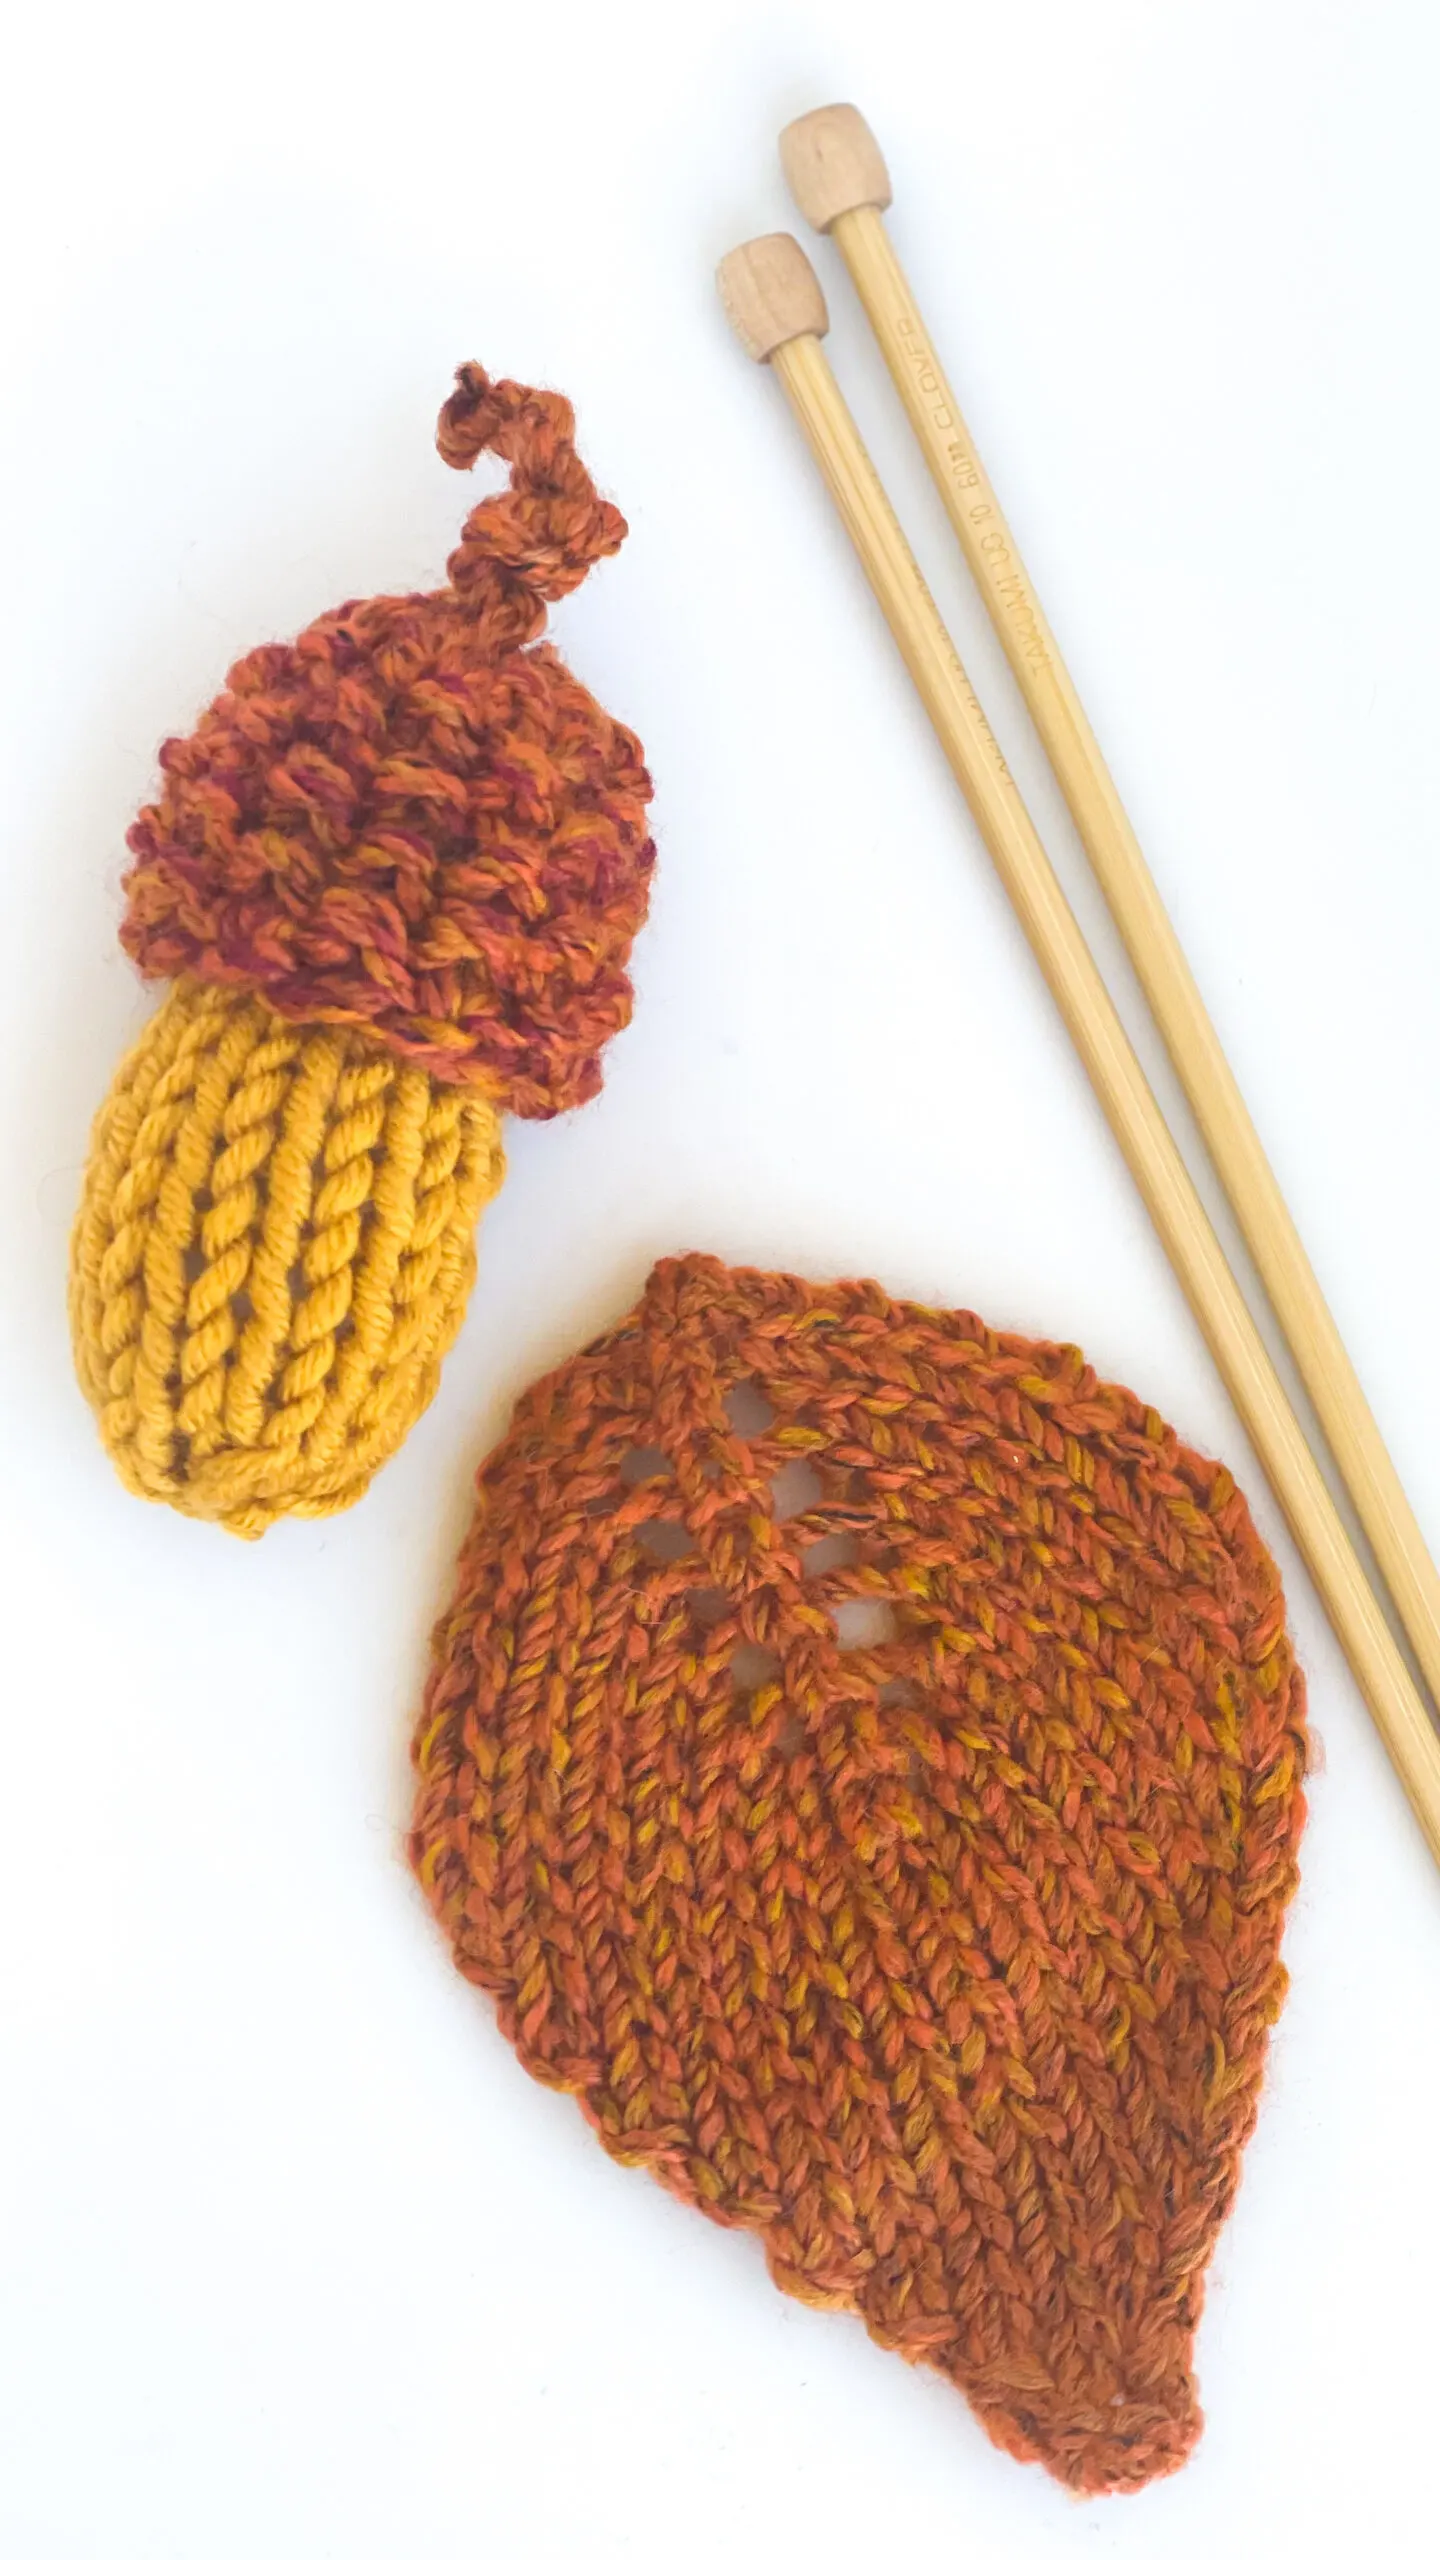 Knitted Acorn and Leaf with needles.